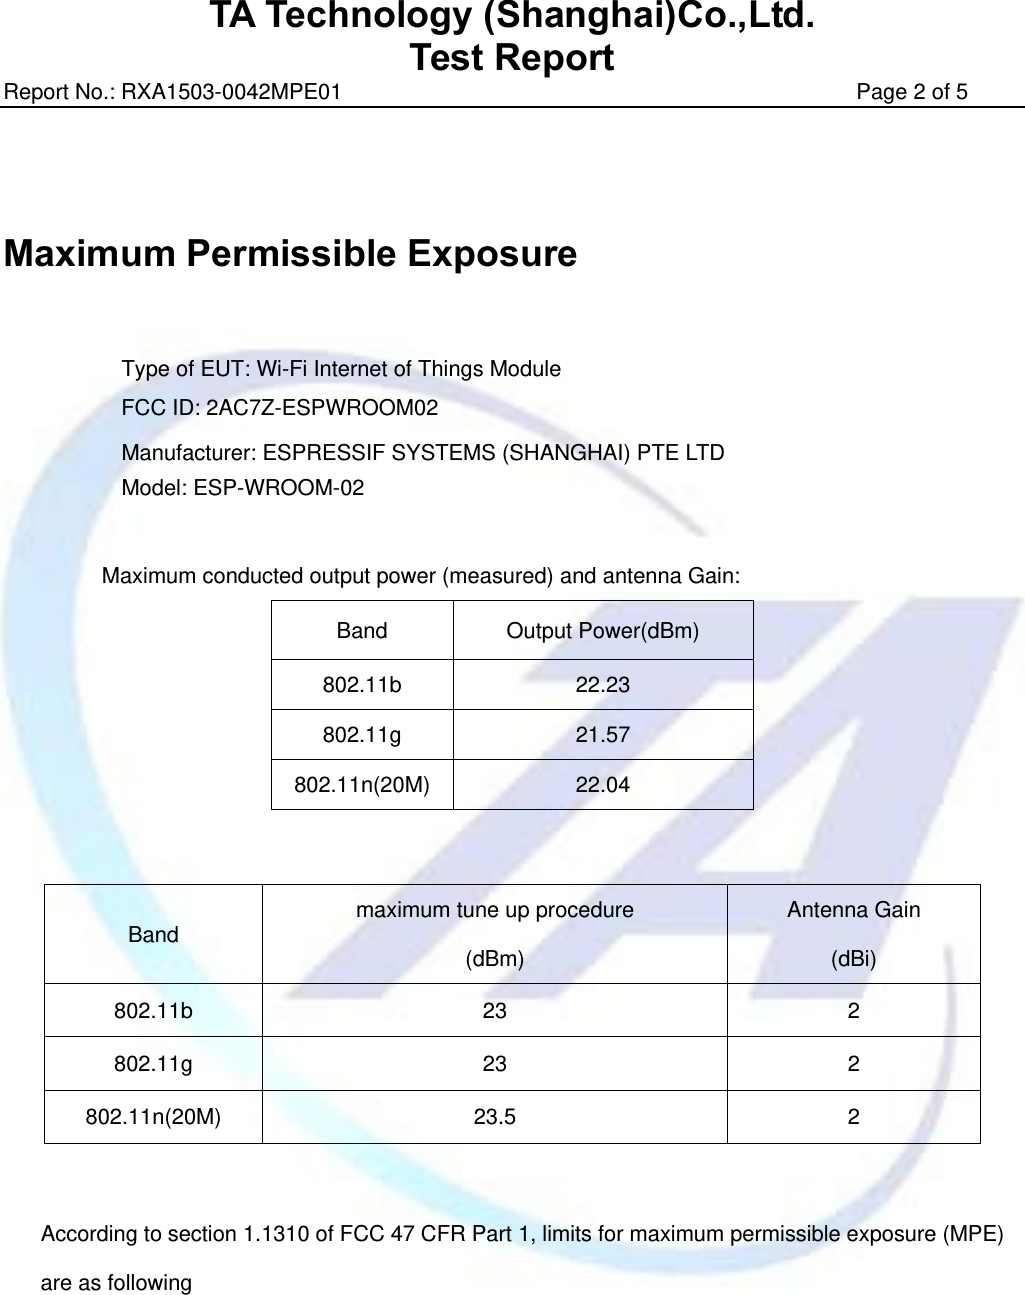 TA Technology (Shanghai)Co.,Ltd. Test Report Report No.: RXA1503-0042MPE01                                               Page 2 of 5     Maximum Permissible Exposure   Type of EUT: Wi-Fi Internet of Things Module FCC ID: 2AC7Z-ESPWROOM02   Manufacturer: ESPRESSIF SYSTEMS (SHANGHAI) PTE LTD Model: ESP-WROOM-02  Maximum conducted output power (measured) and antenna Gain: Band Output Power(dBm) 802.11b 22.23 802.11g 21.57 802.11n(20M) 22.04     According to section 1.1310 of FCC 47 CFR Part 1, limits for maximum permissible exposure (MPE) are as following Band  maximum tune up procedure (dBm)  Antenna Gain (dBi) 802.11b 23  2 802.11g 23  2 802.11n(20M) 23.5  2 